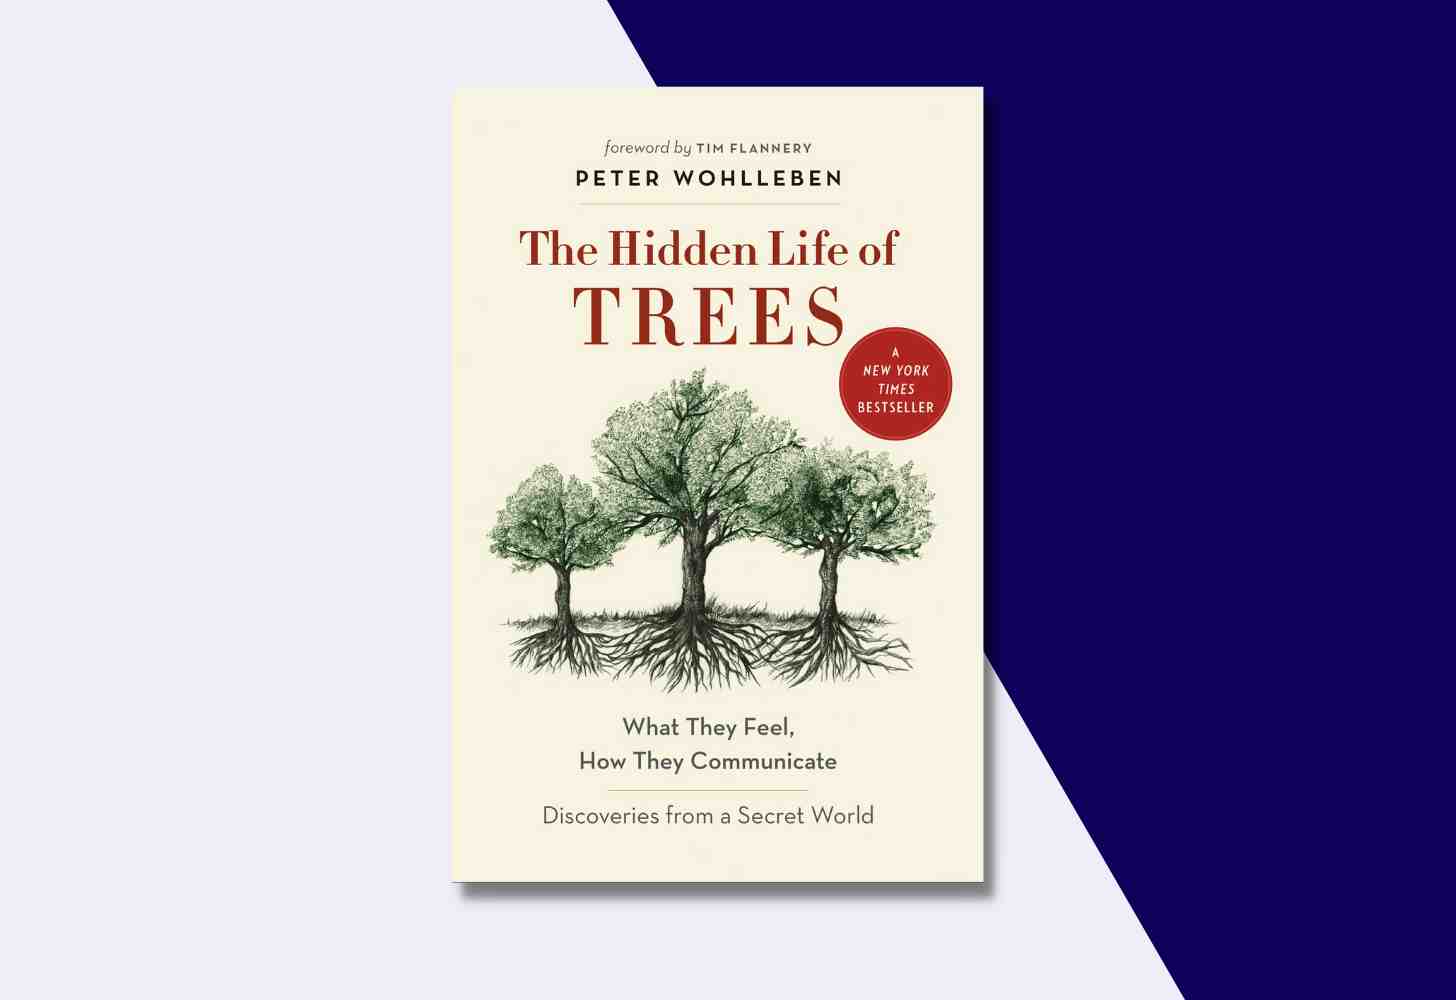 The Cover Of: “The Hidden Life of Trees” by Tim Flannery